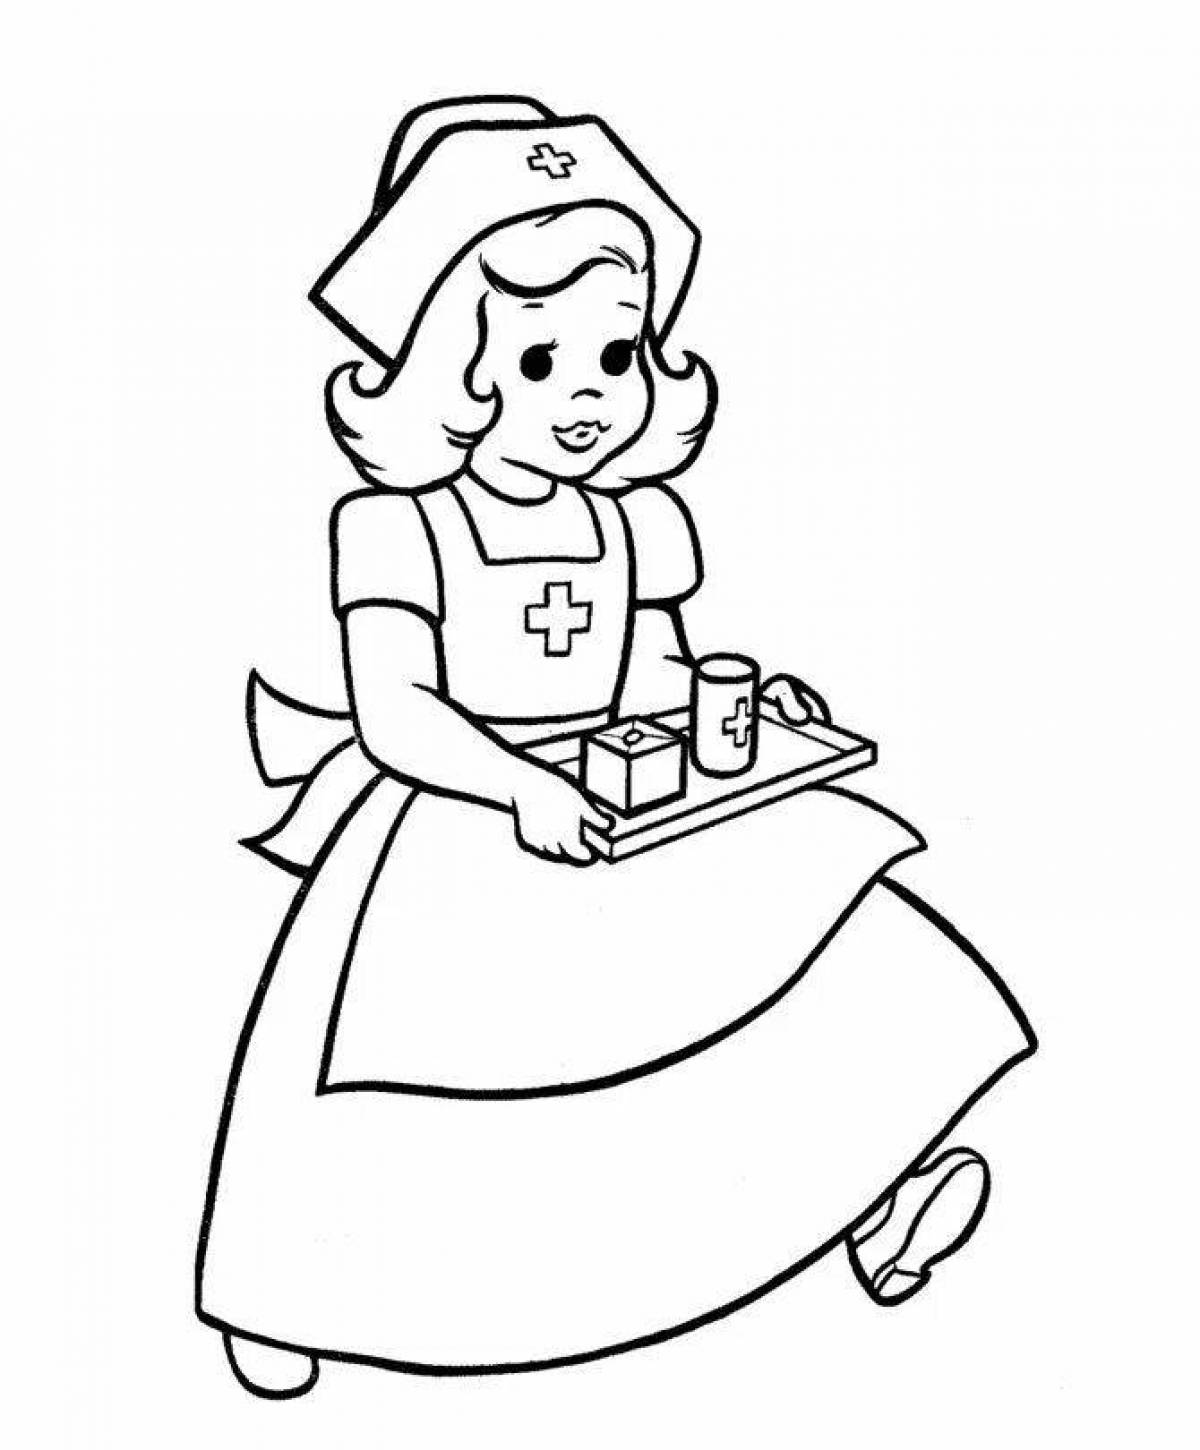 Colorful job coloring pages for kids in kindergarten